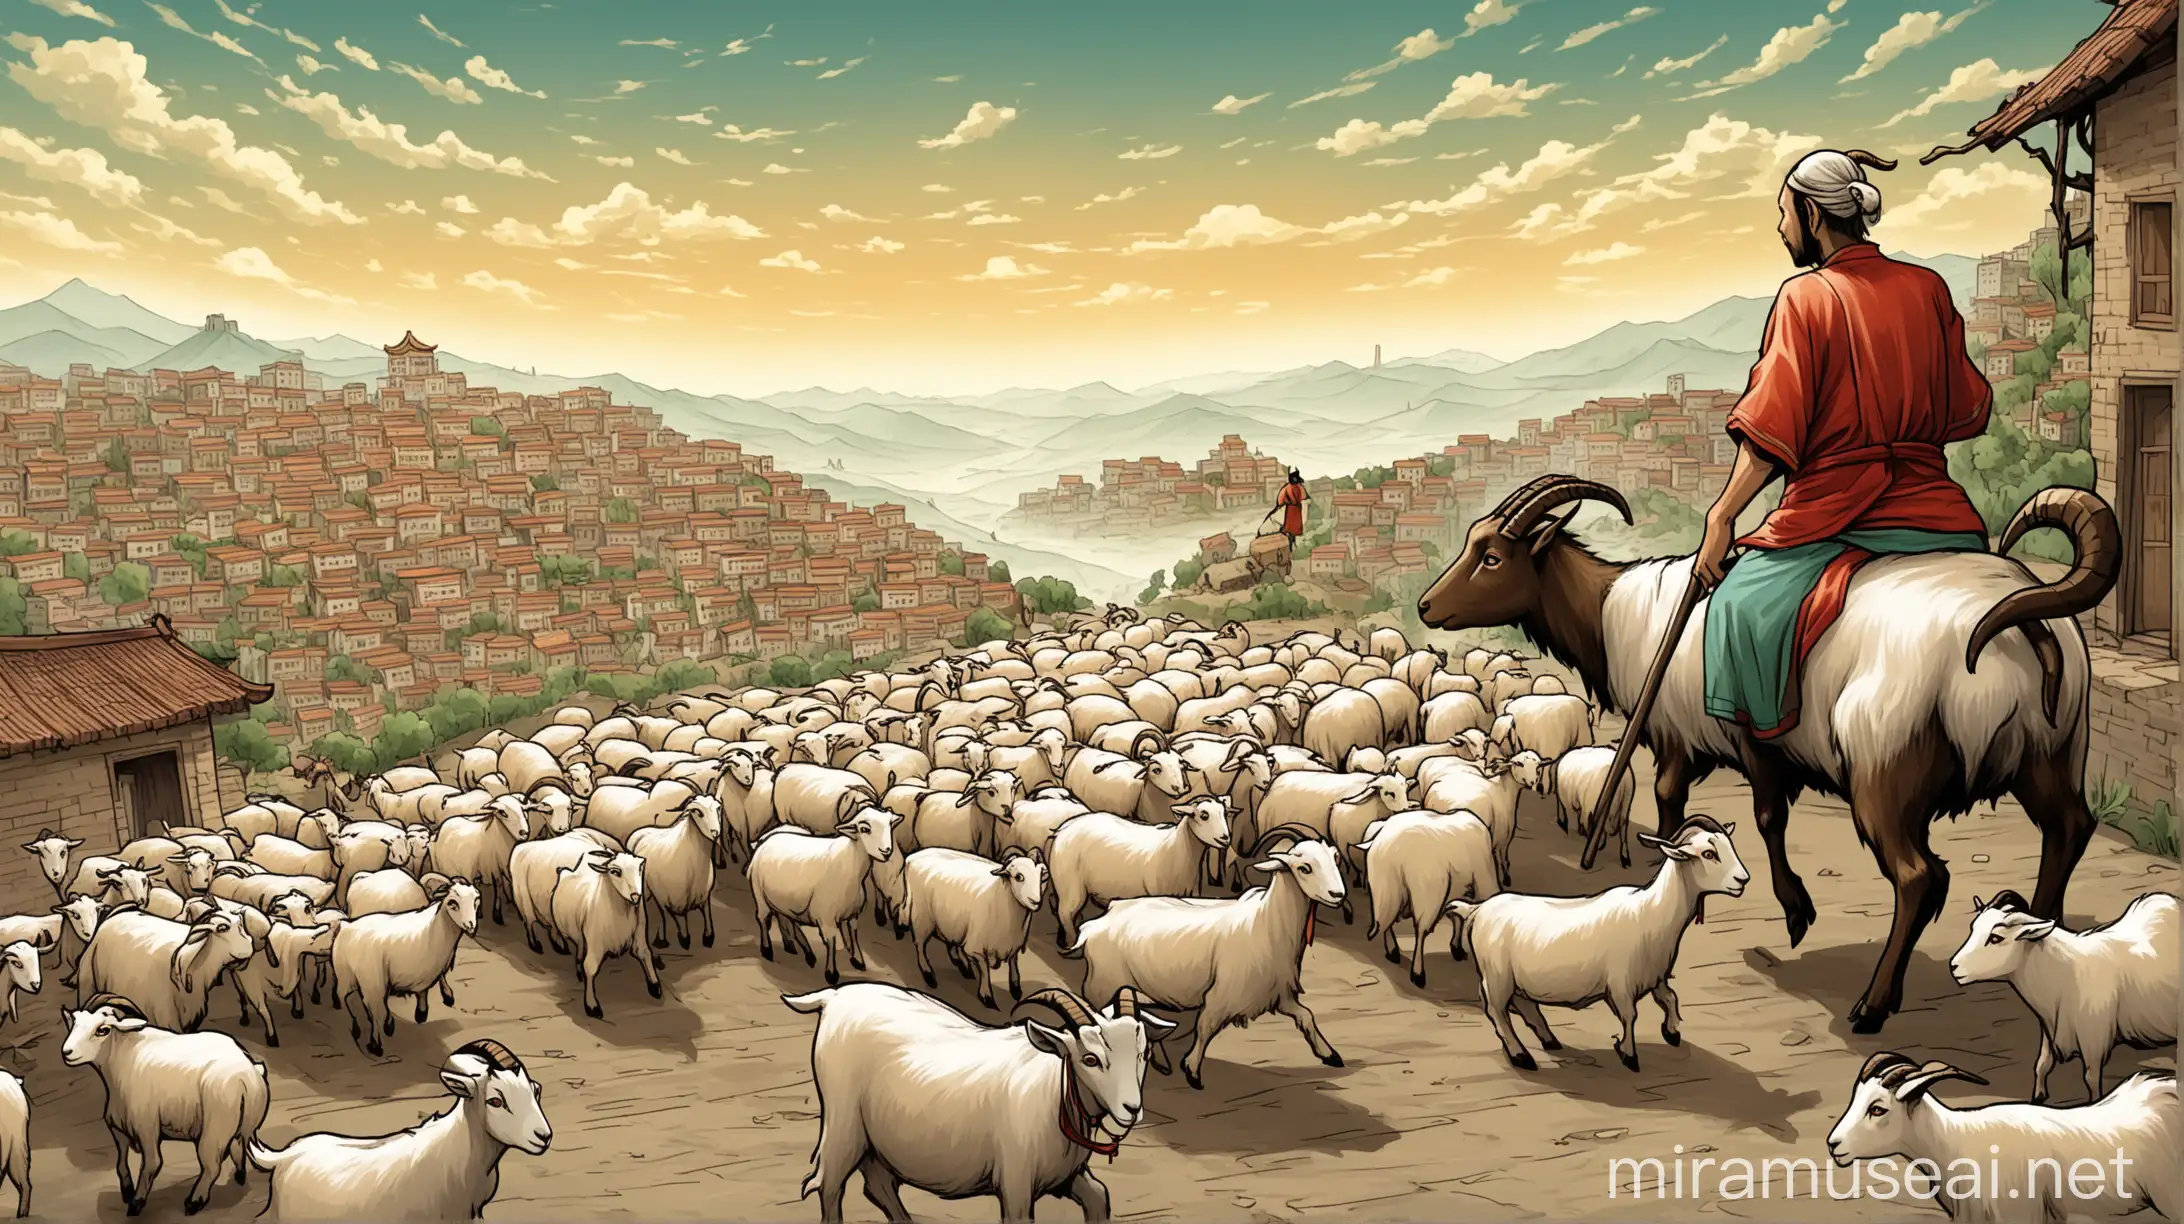 But one day, goat realized that the shepherd and the villagers were searching for it. The Chinese Goat had to flee again, this time towards a big city.